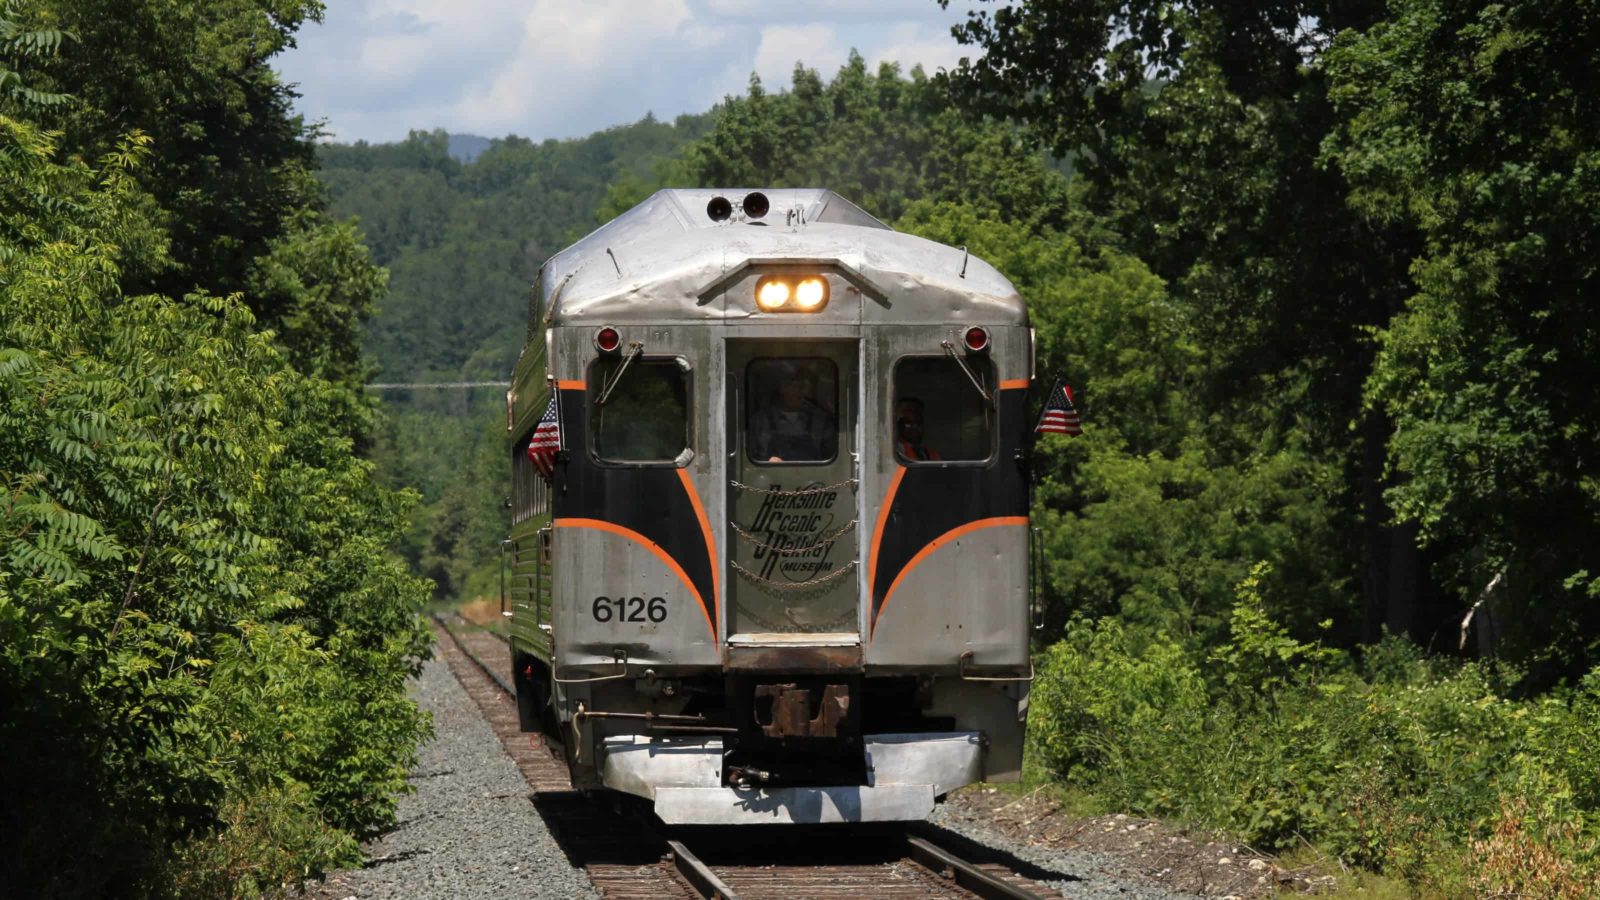 The Berkshire Scenic Railway runs historic train rides from Adams to North Adams on the Hoosac Valley Line.